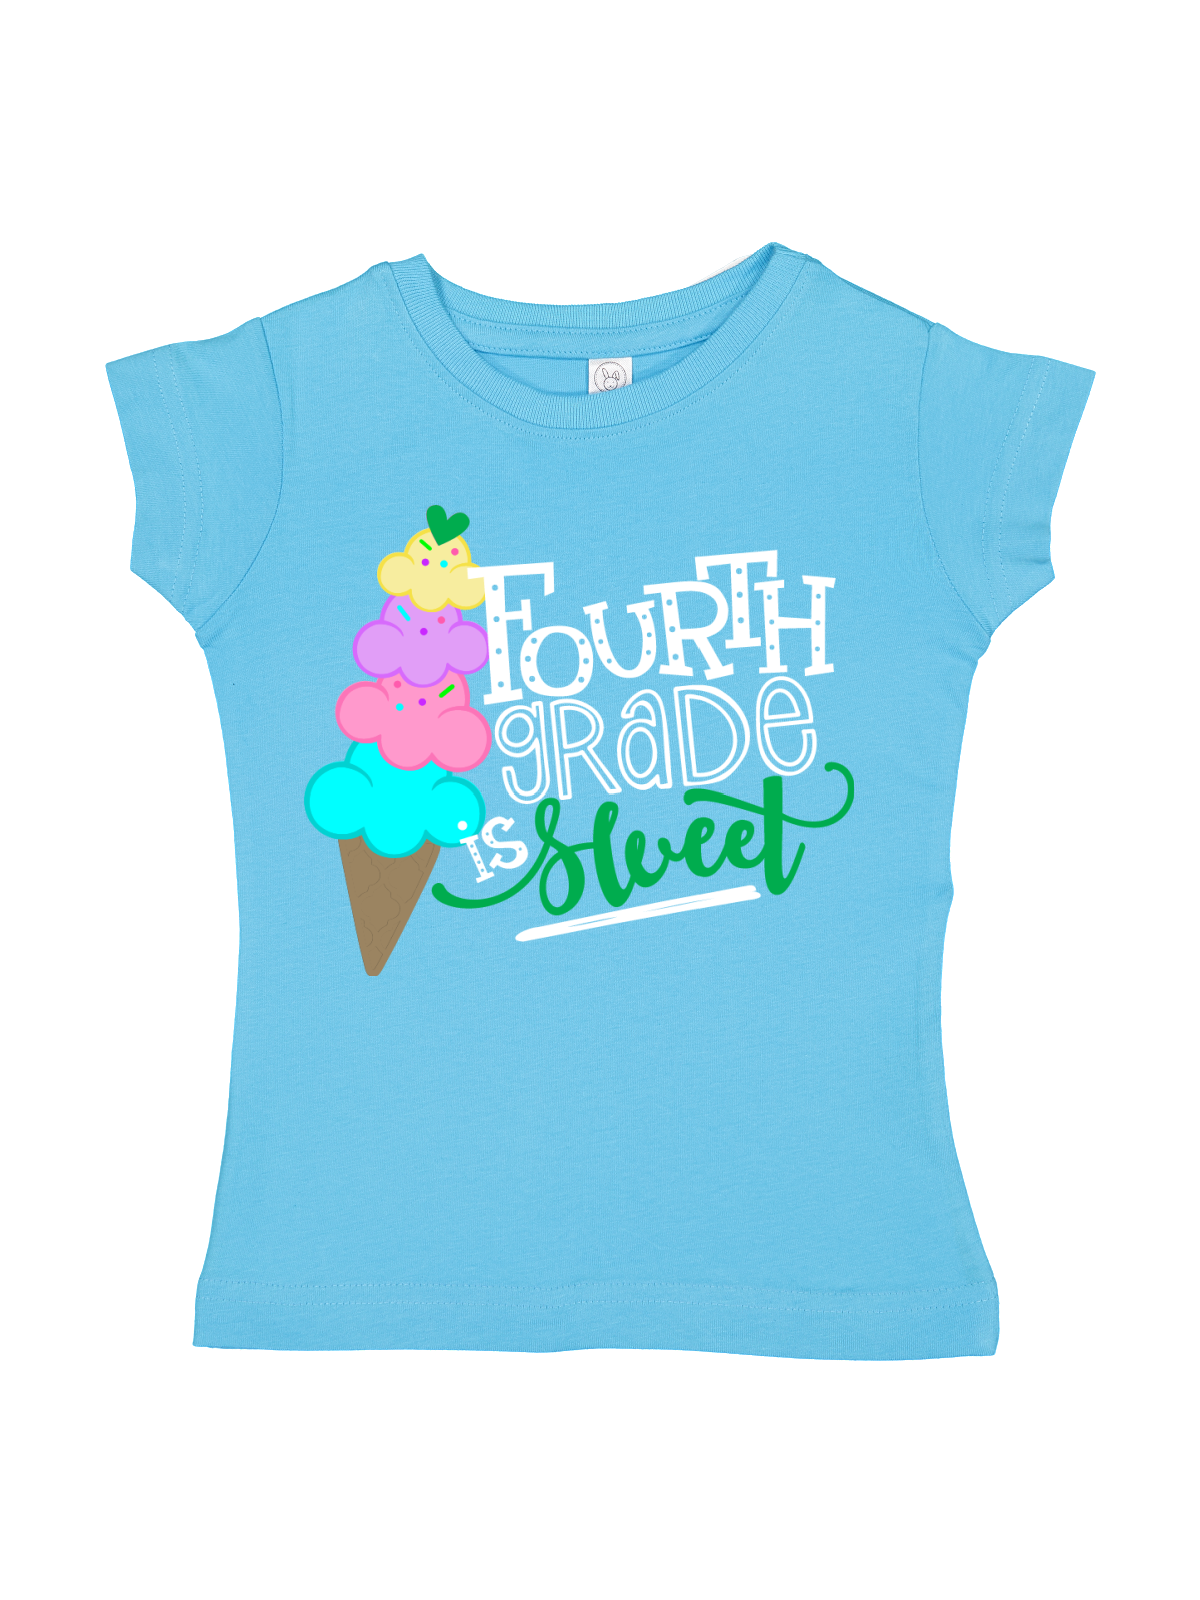 Fourth Grade is Sweet Girls Shirt in Blue